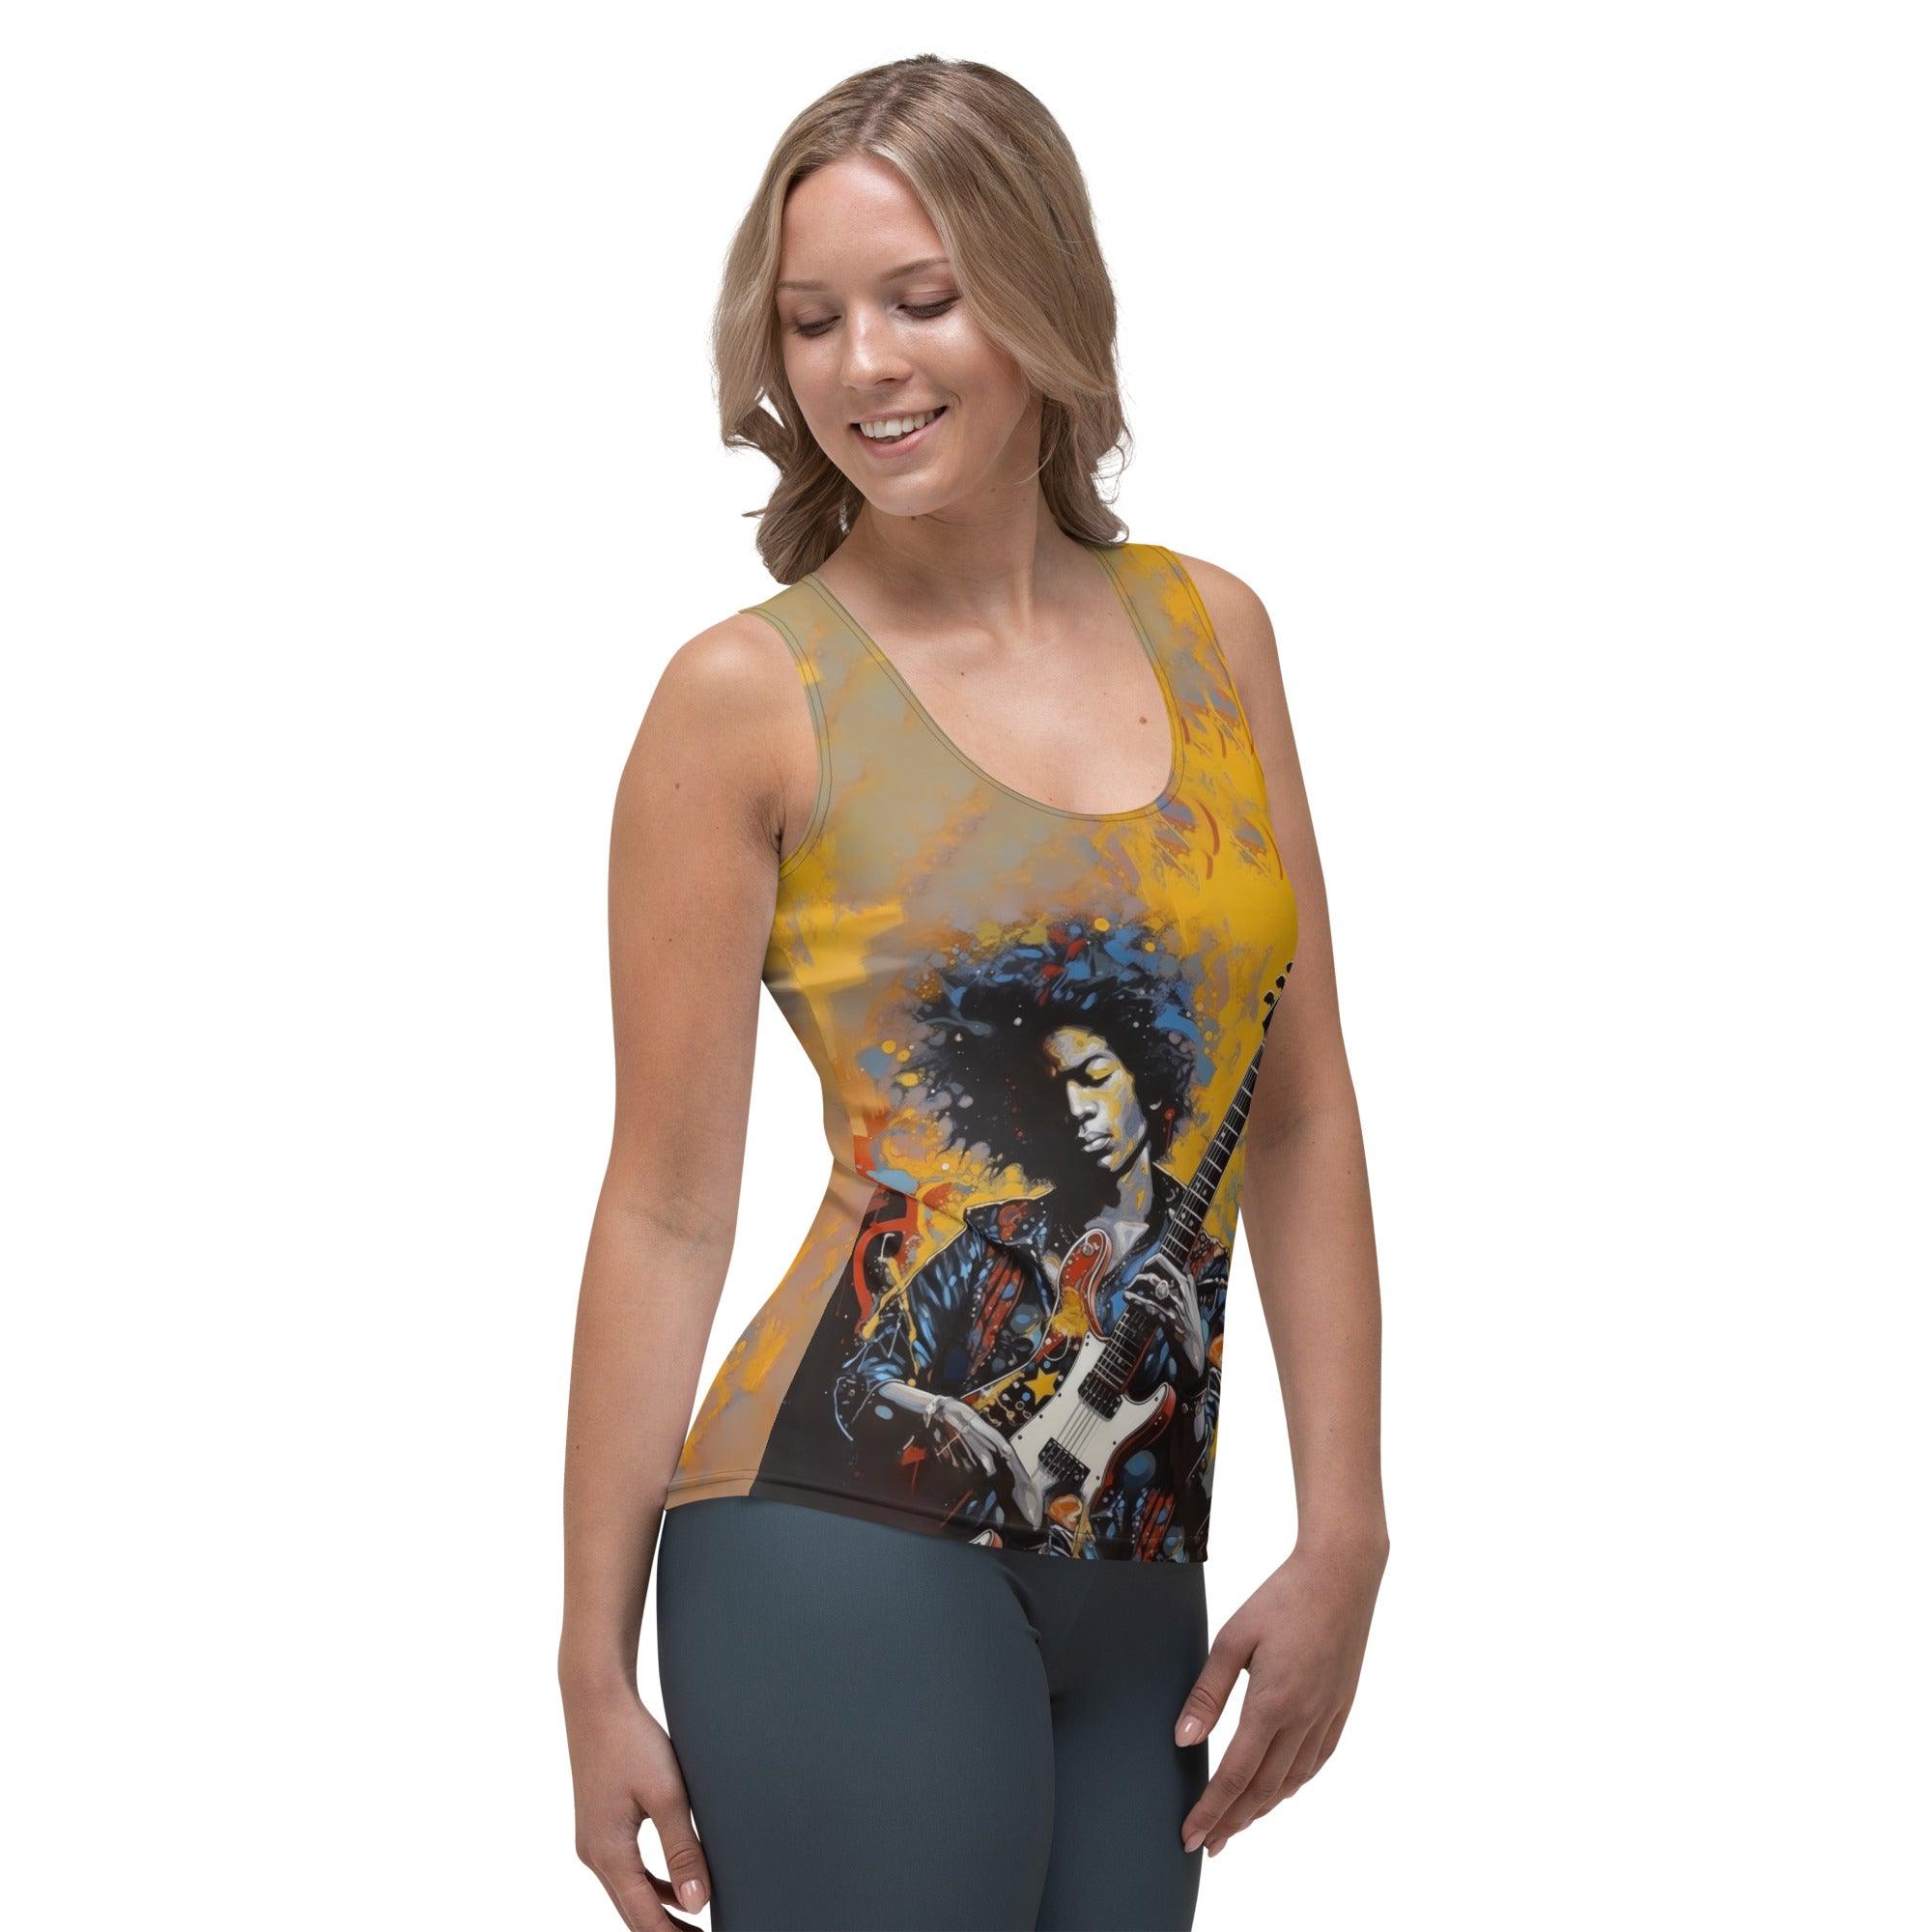 Melodies-Inspire-Dreams-Sublimation-Cut-Sew-Tank-Top-Fabric-Texture